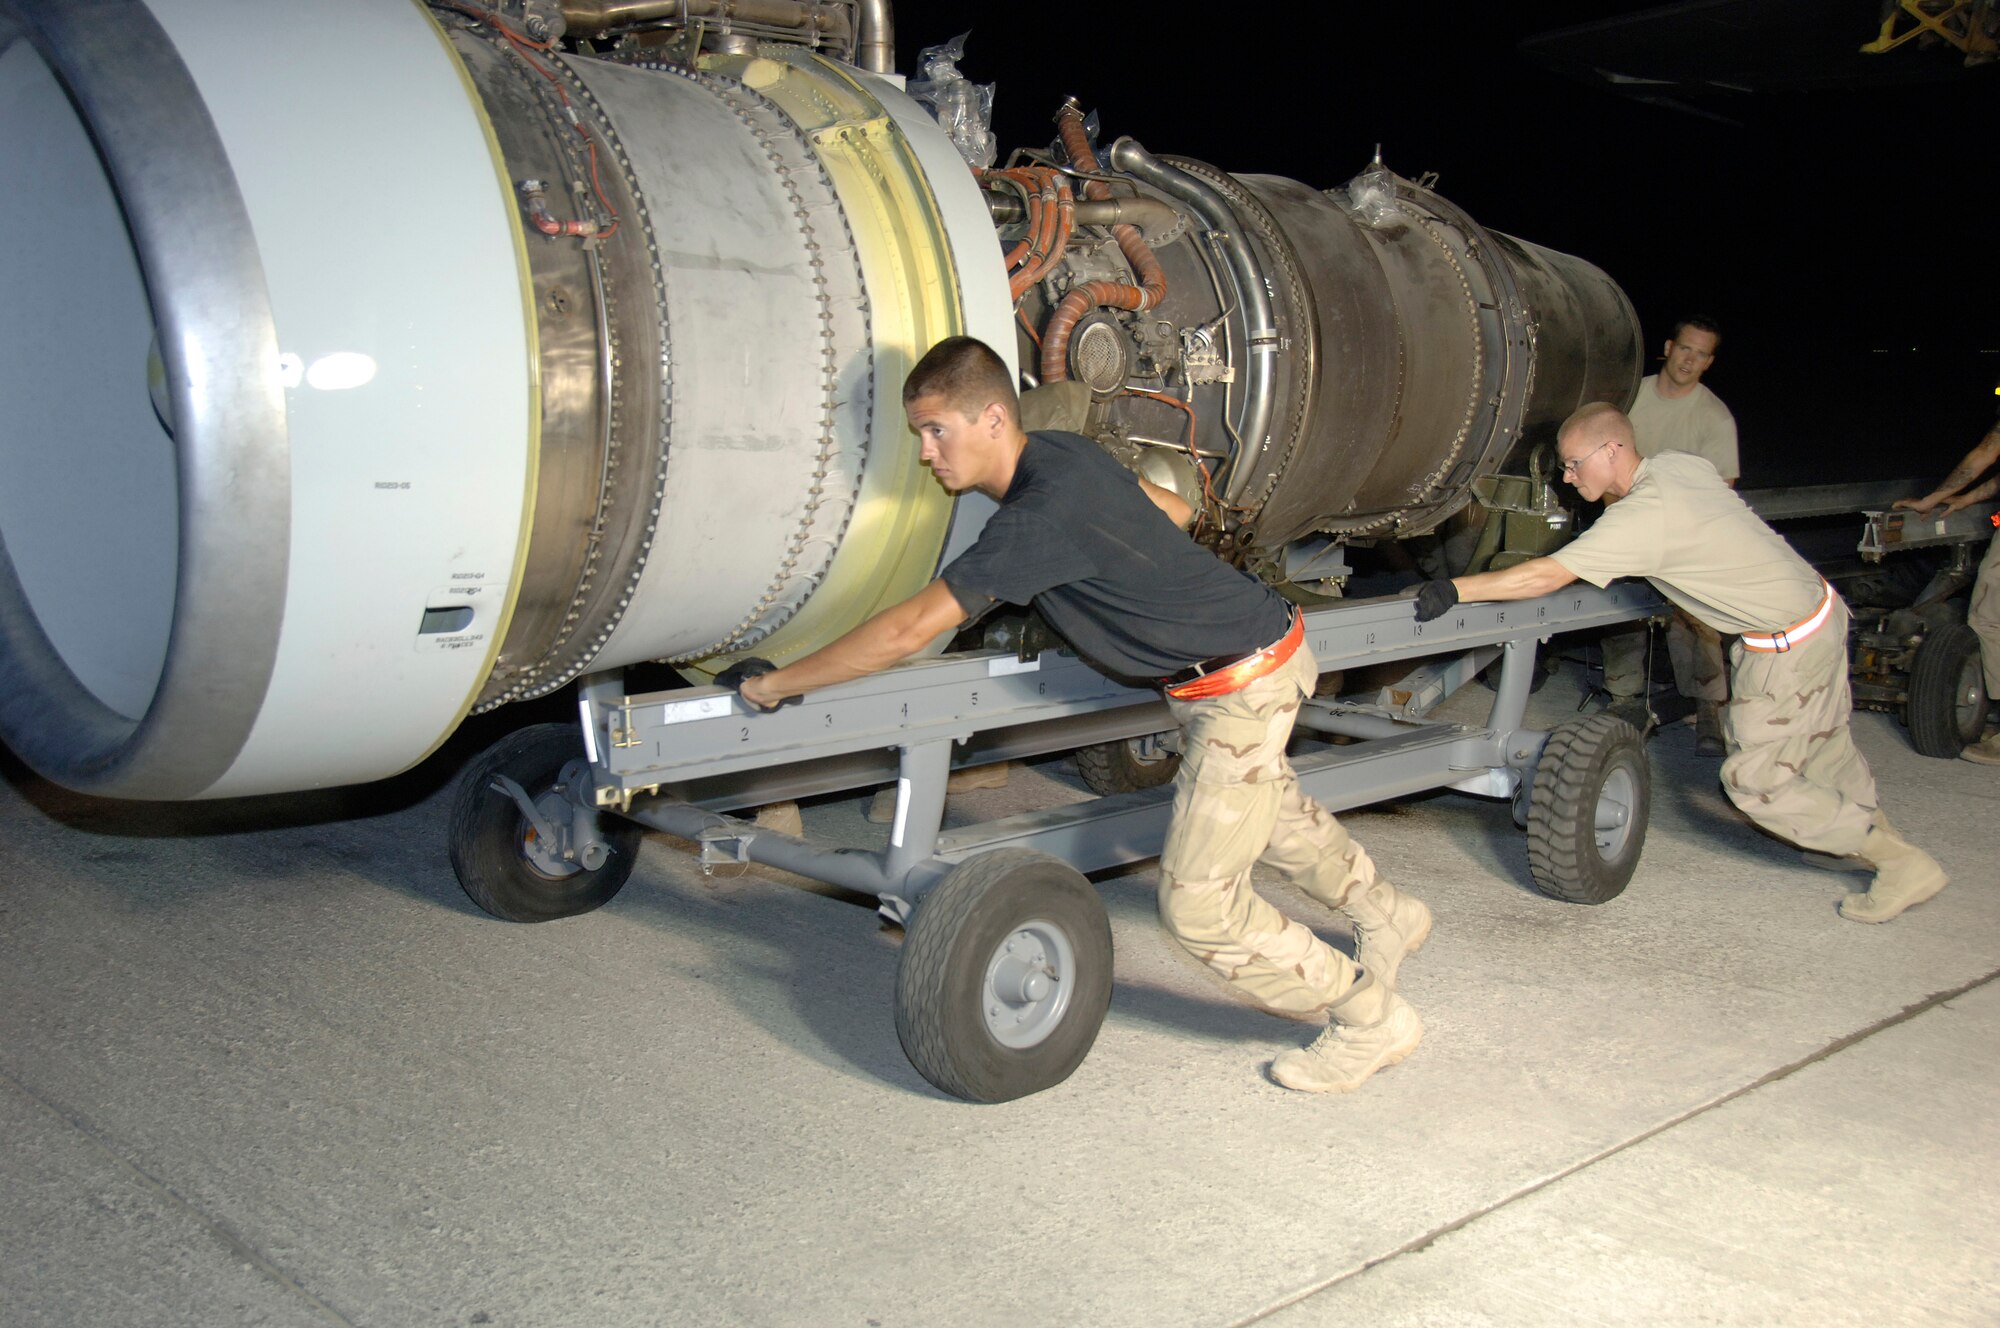 SOUTHWEST ASIA--(left to right) Airman 1st Class Seth Hammont, Senior Airman Robert West from the 380th Expeditionary Aircraft Maintenance Squadron pushes an E-3 Sentry engine while Senior Airman Rodney Poe, also from the 380th EAMXS guides it out here Aug. 24.  They are replacing #4 Engine due to the fact that it surpassed allowable exhaust temperature limits. This was the 6th engine change in 120 days. The normal fix time to remove and replace an E-3 engine is 18 hours. The technicians here have sliced that time in more then half. Their average time to change an engine and replace the aircraft to flyable condition here is 8 1/2 hours. They are all deployed from the 552nd Aircraft Maintenance Squadron, Tinker Air Force Base, Okla. Airman Poe is from Barnwell, Ark., Amn Hammont is from Jordanville, N.Y., and Airman West is from Olympia, Wash.(U.S. Air Force photo/Tech. Sgt. Christopher A Campbell)(released)